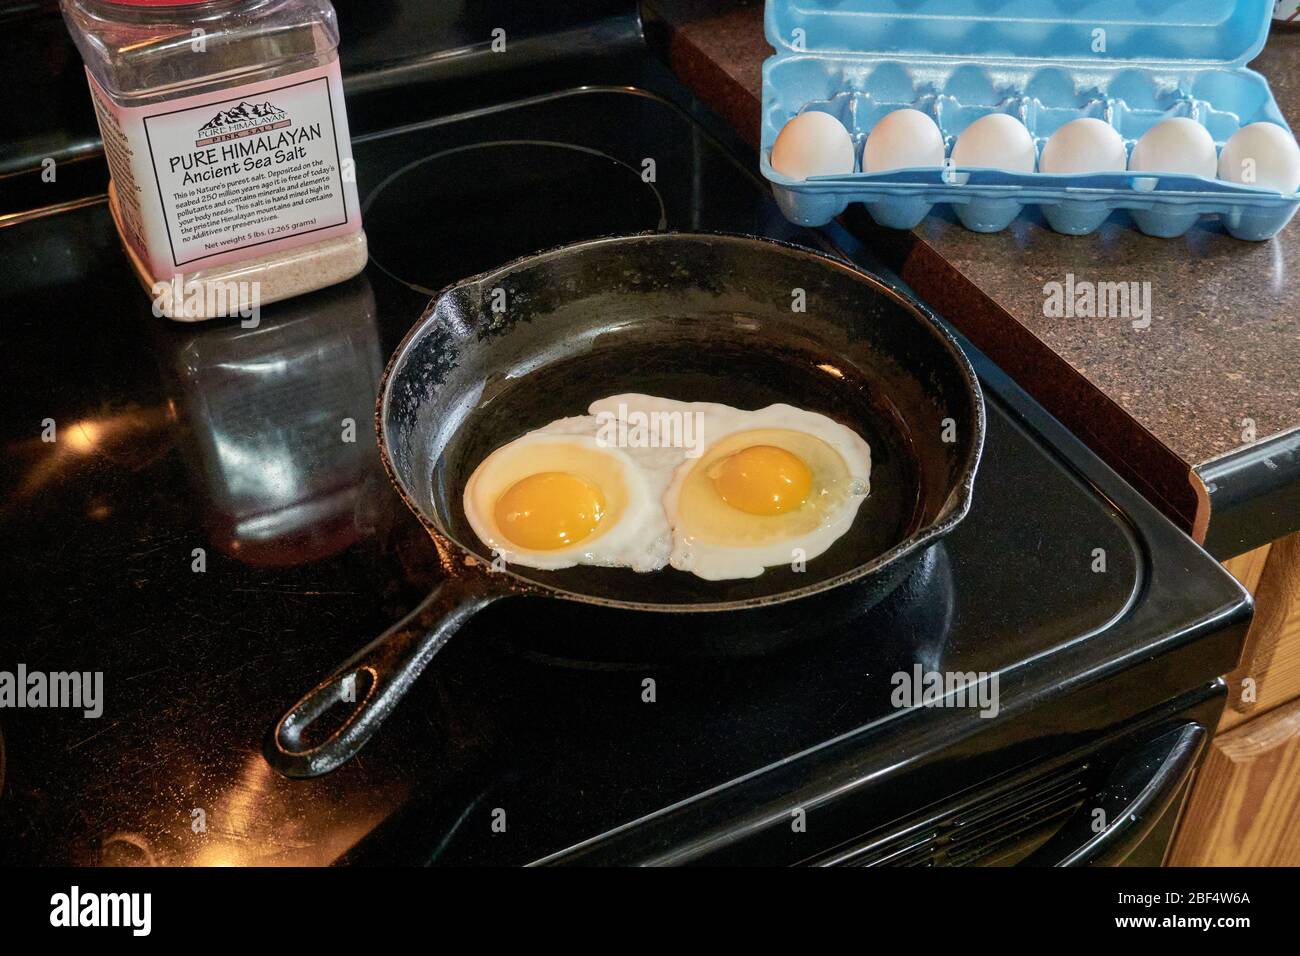 Breakfast Two sunny side up eggs frying in cast iron skillet Stock Photo